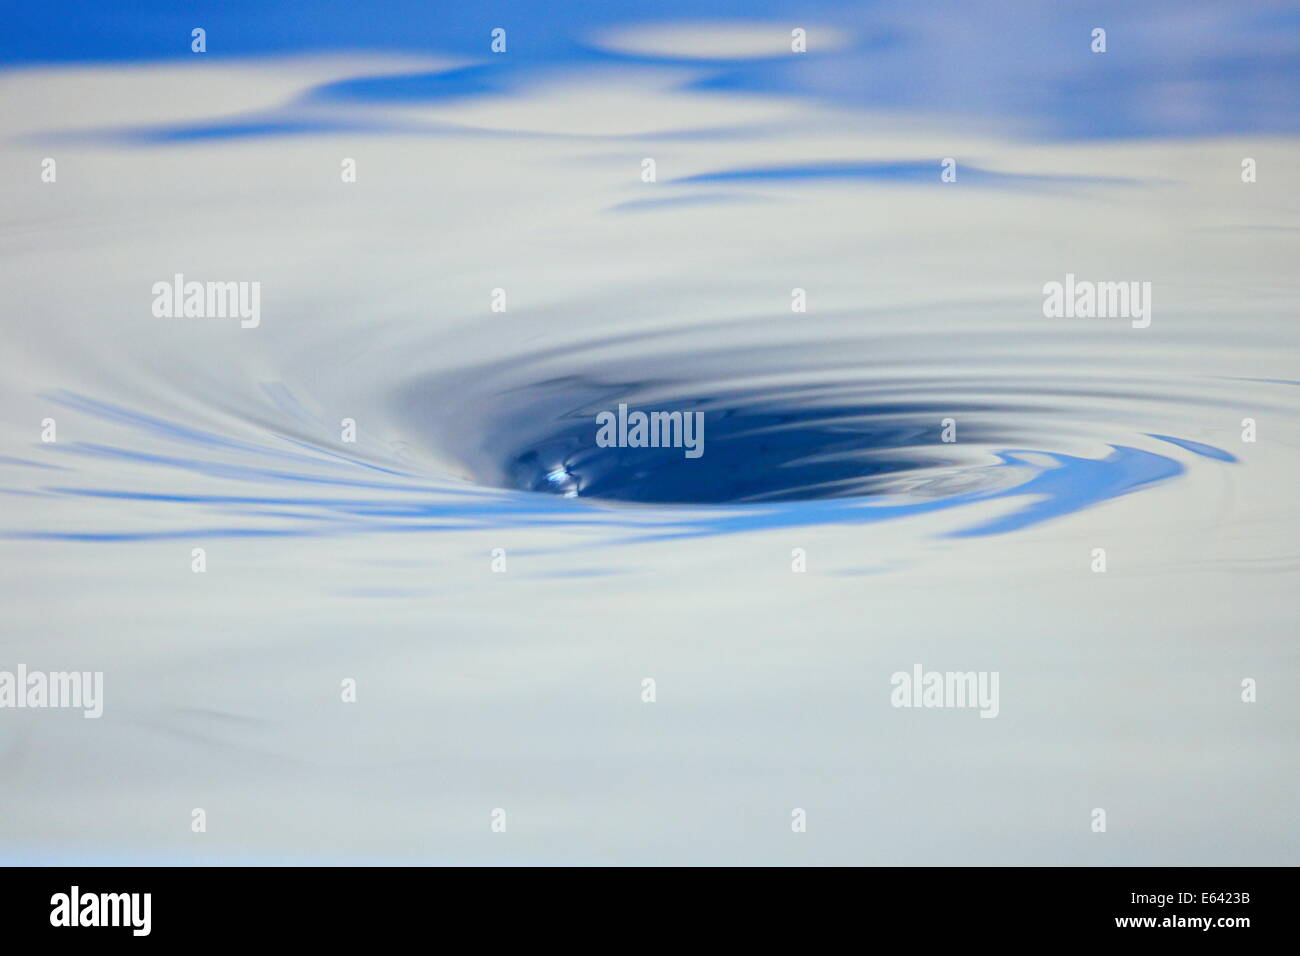 Water swirls and bubbles as it descends into a whirlpool. Stock Photo